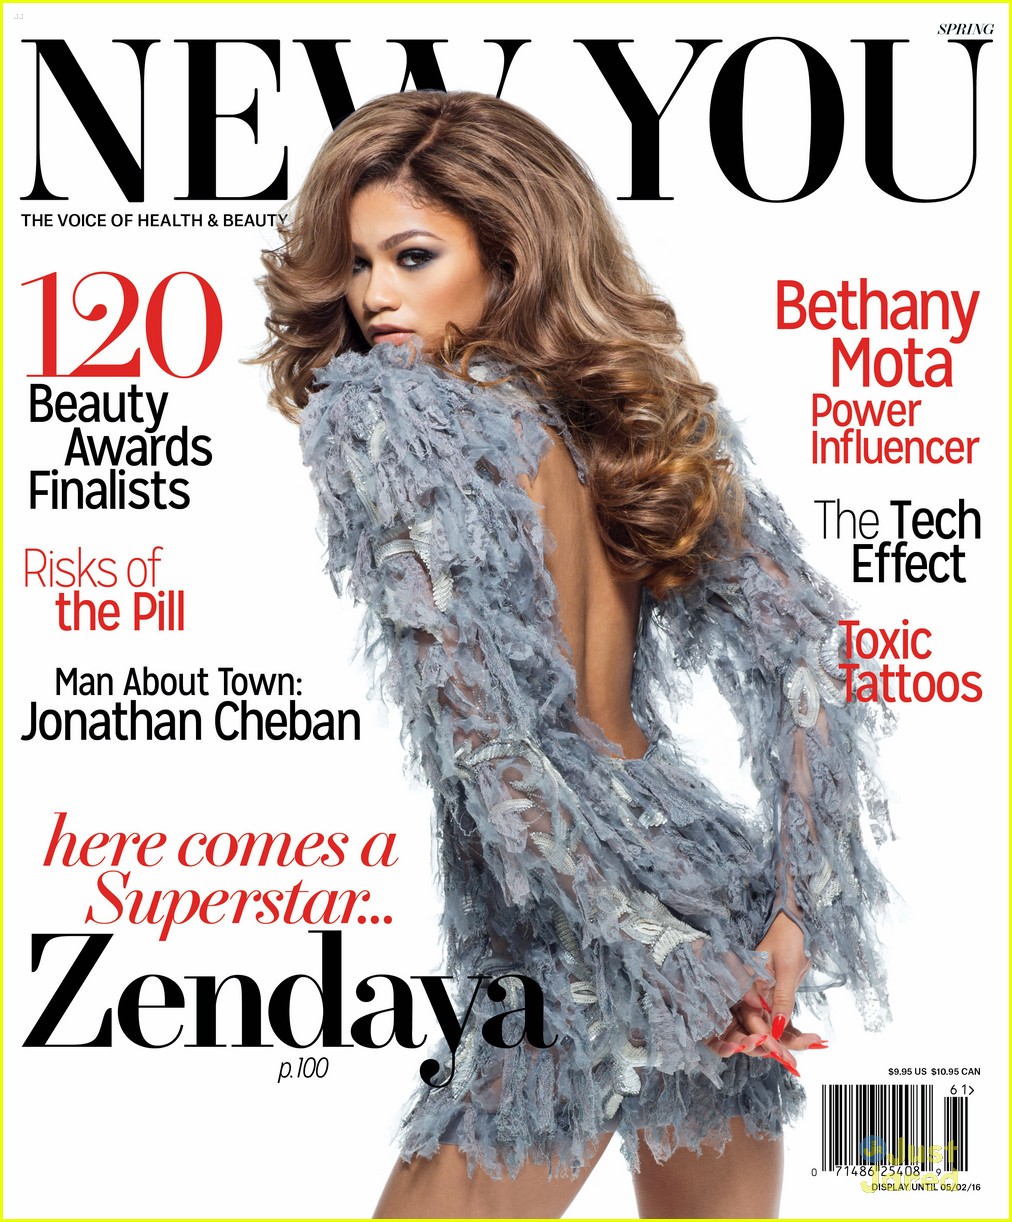 zendaya new you cover quotes 01